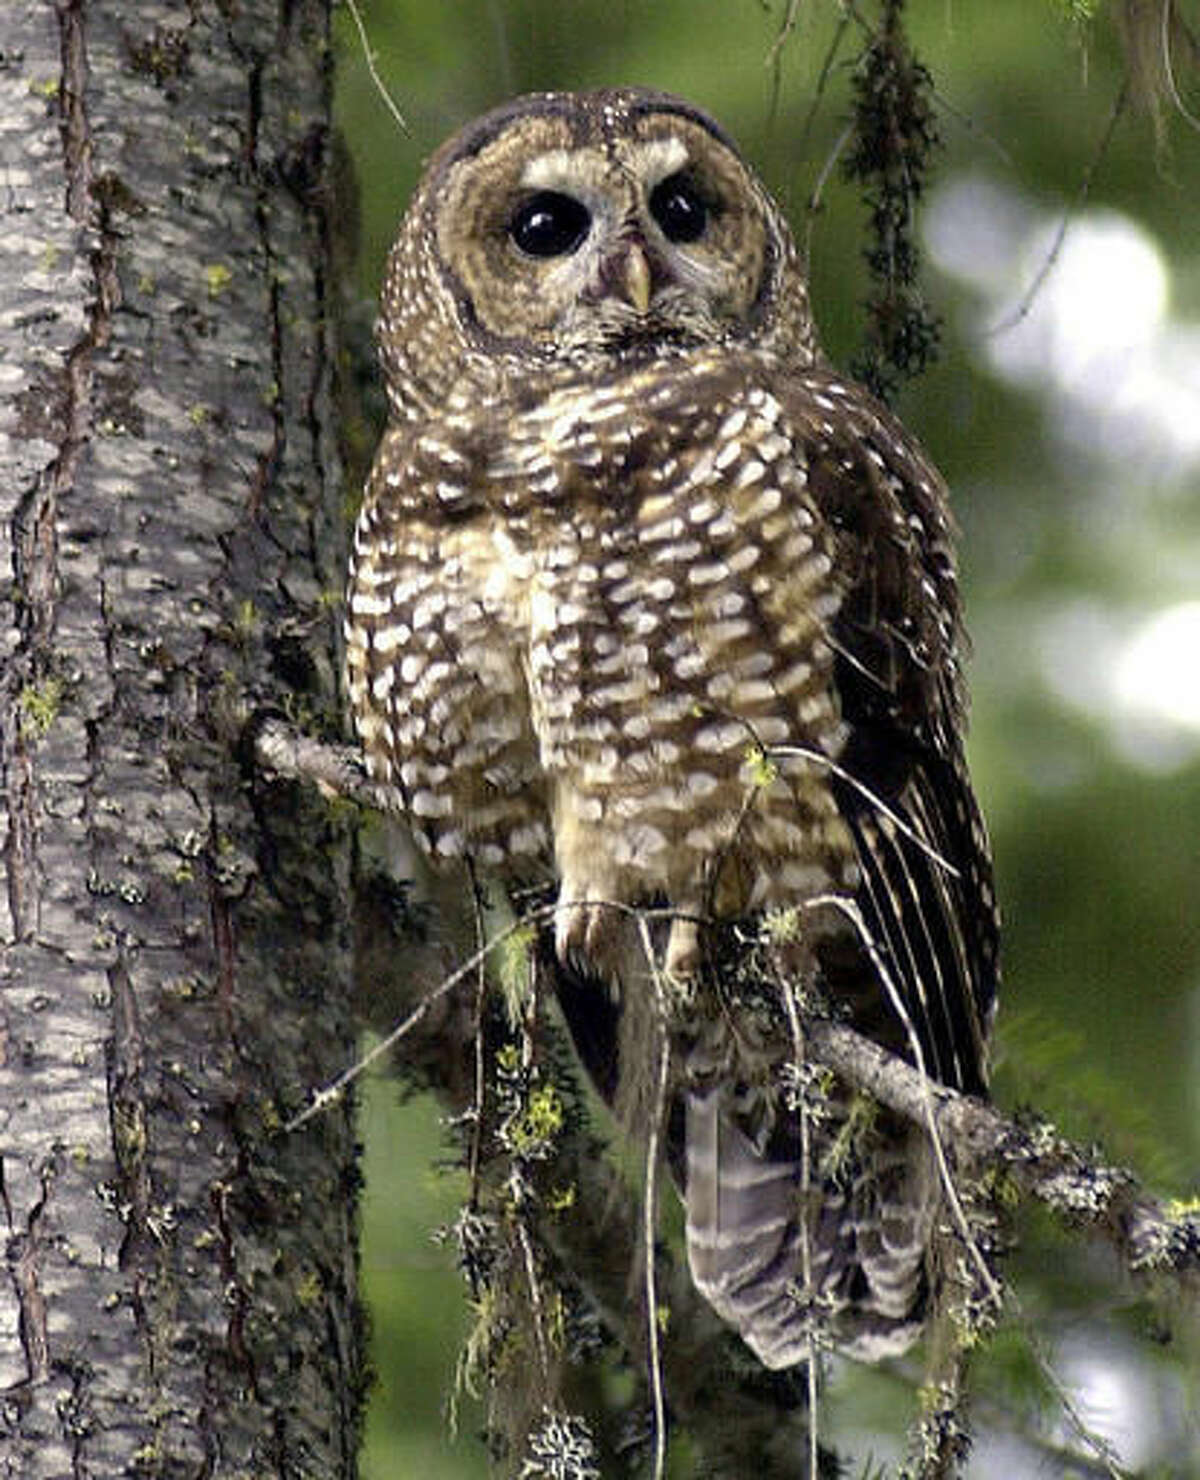 FILE - In this May 8, 2003, file photo, a Northern Spotted Owl sits on a tree in the Deschutes National Forest near Camp Sherman, Ore. A federal agency has enacted a plan to manage more than 2.2 million acres of land in western Oregon that would increase the potential timber harvest by as much as 37 percent. The plan immediately draws fire from both the wood-products industry and conservationists, with one group complaining that the new logging levels are still too low and another saying it endangers the Northern Spotted Owl and another protected bird.(AP Photo/Don Ryan, File)